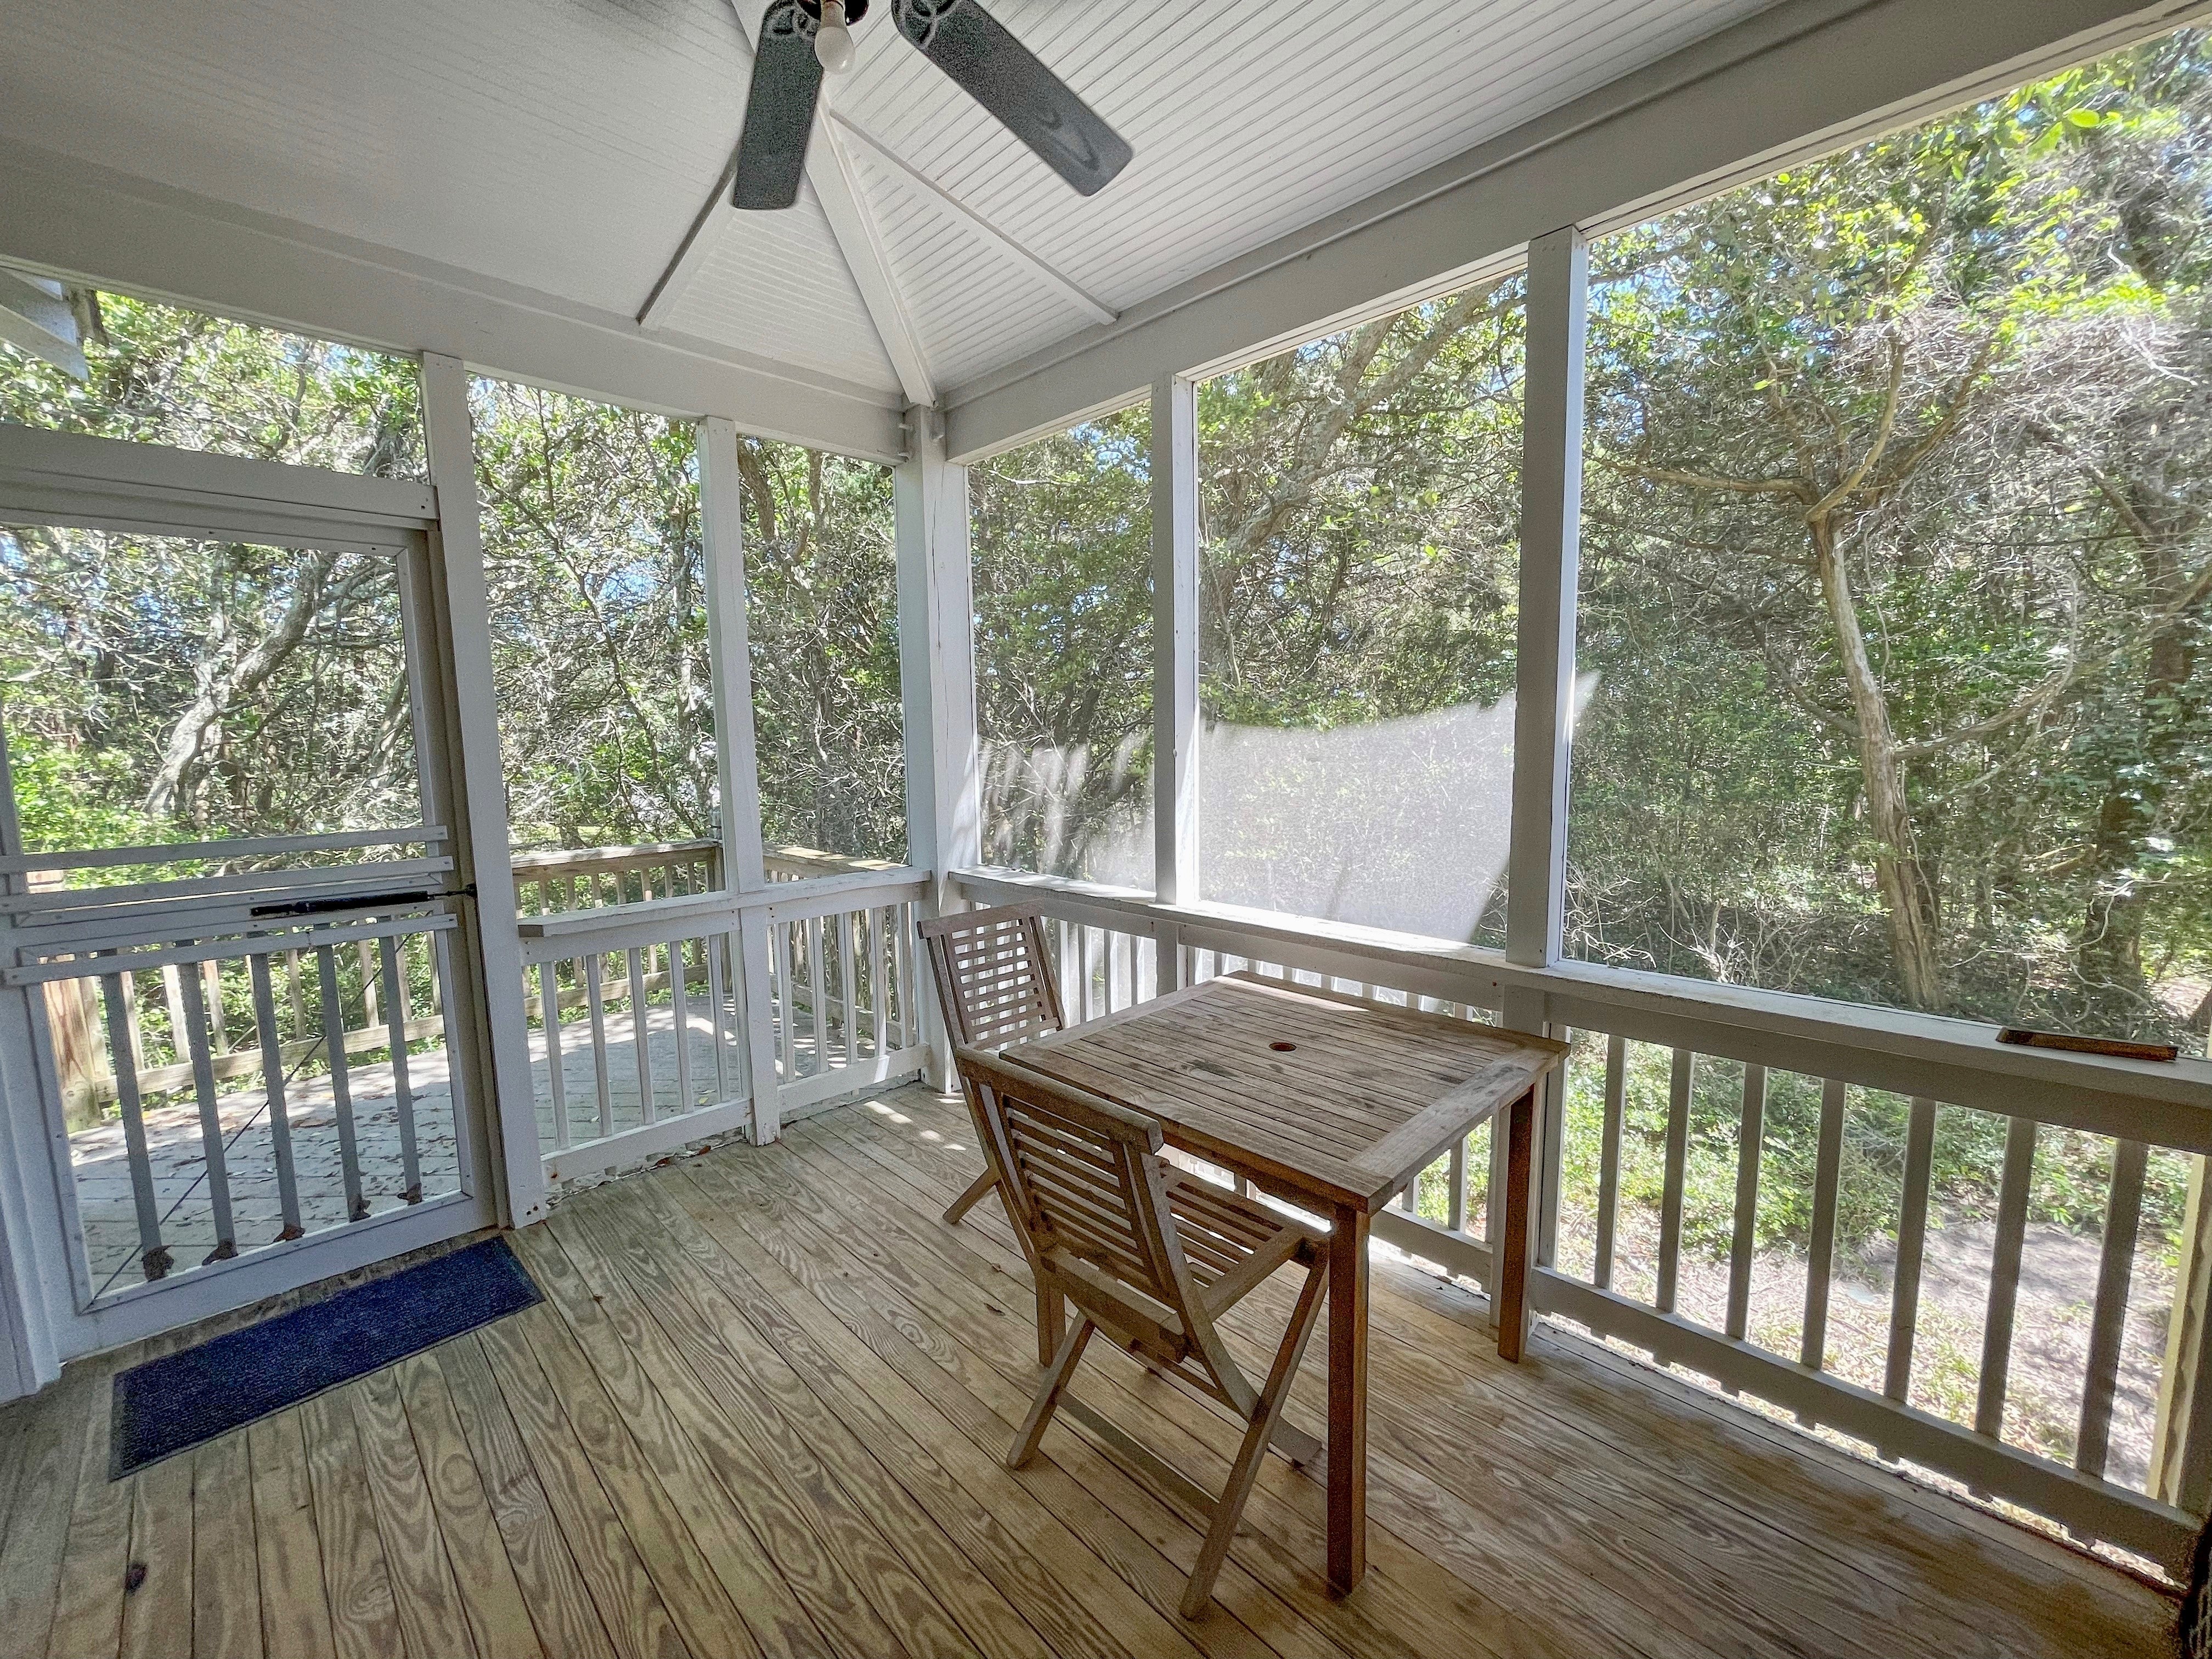 Screened Porch Off Kitchen - Sounds Perfect